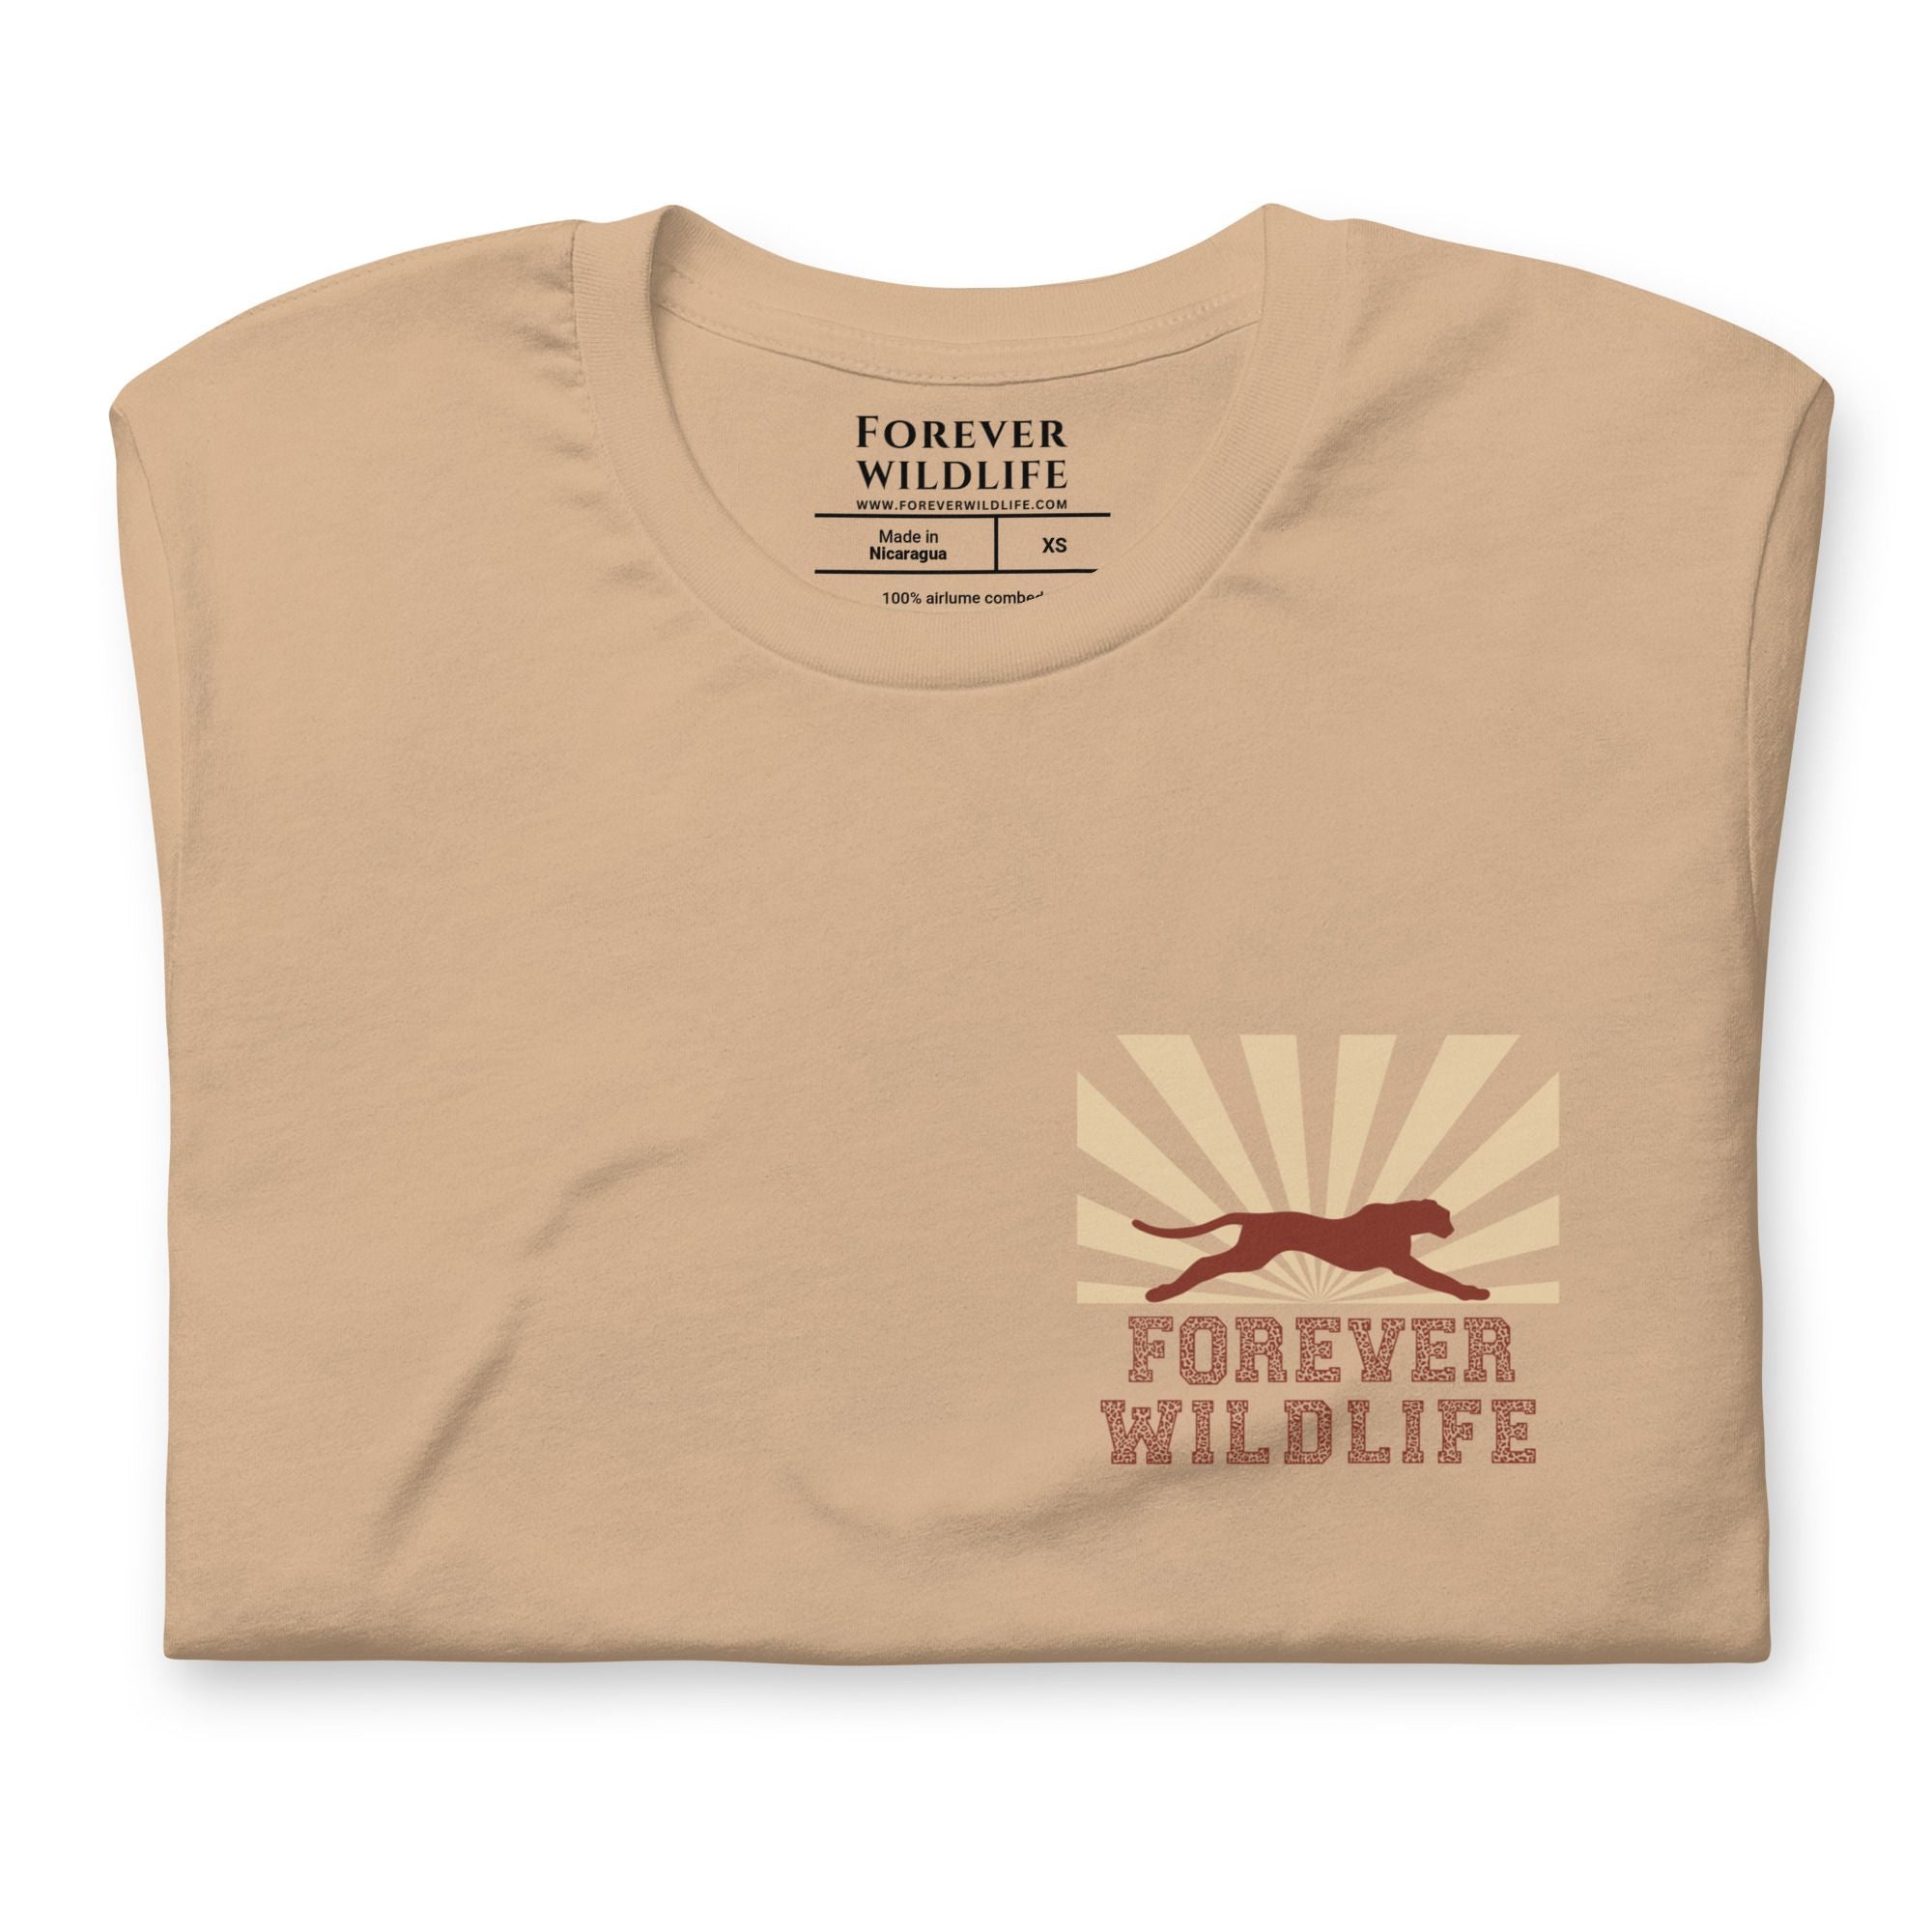 Cheetah Shirt, gorgeous tan Cheetah T-Shirt with a cheetah graphic made by Forever Wildlife selling Wildlife T-Shirts.